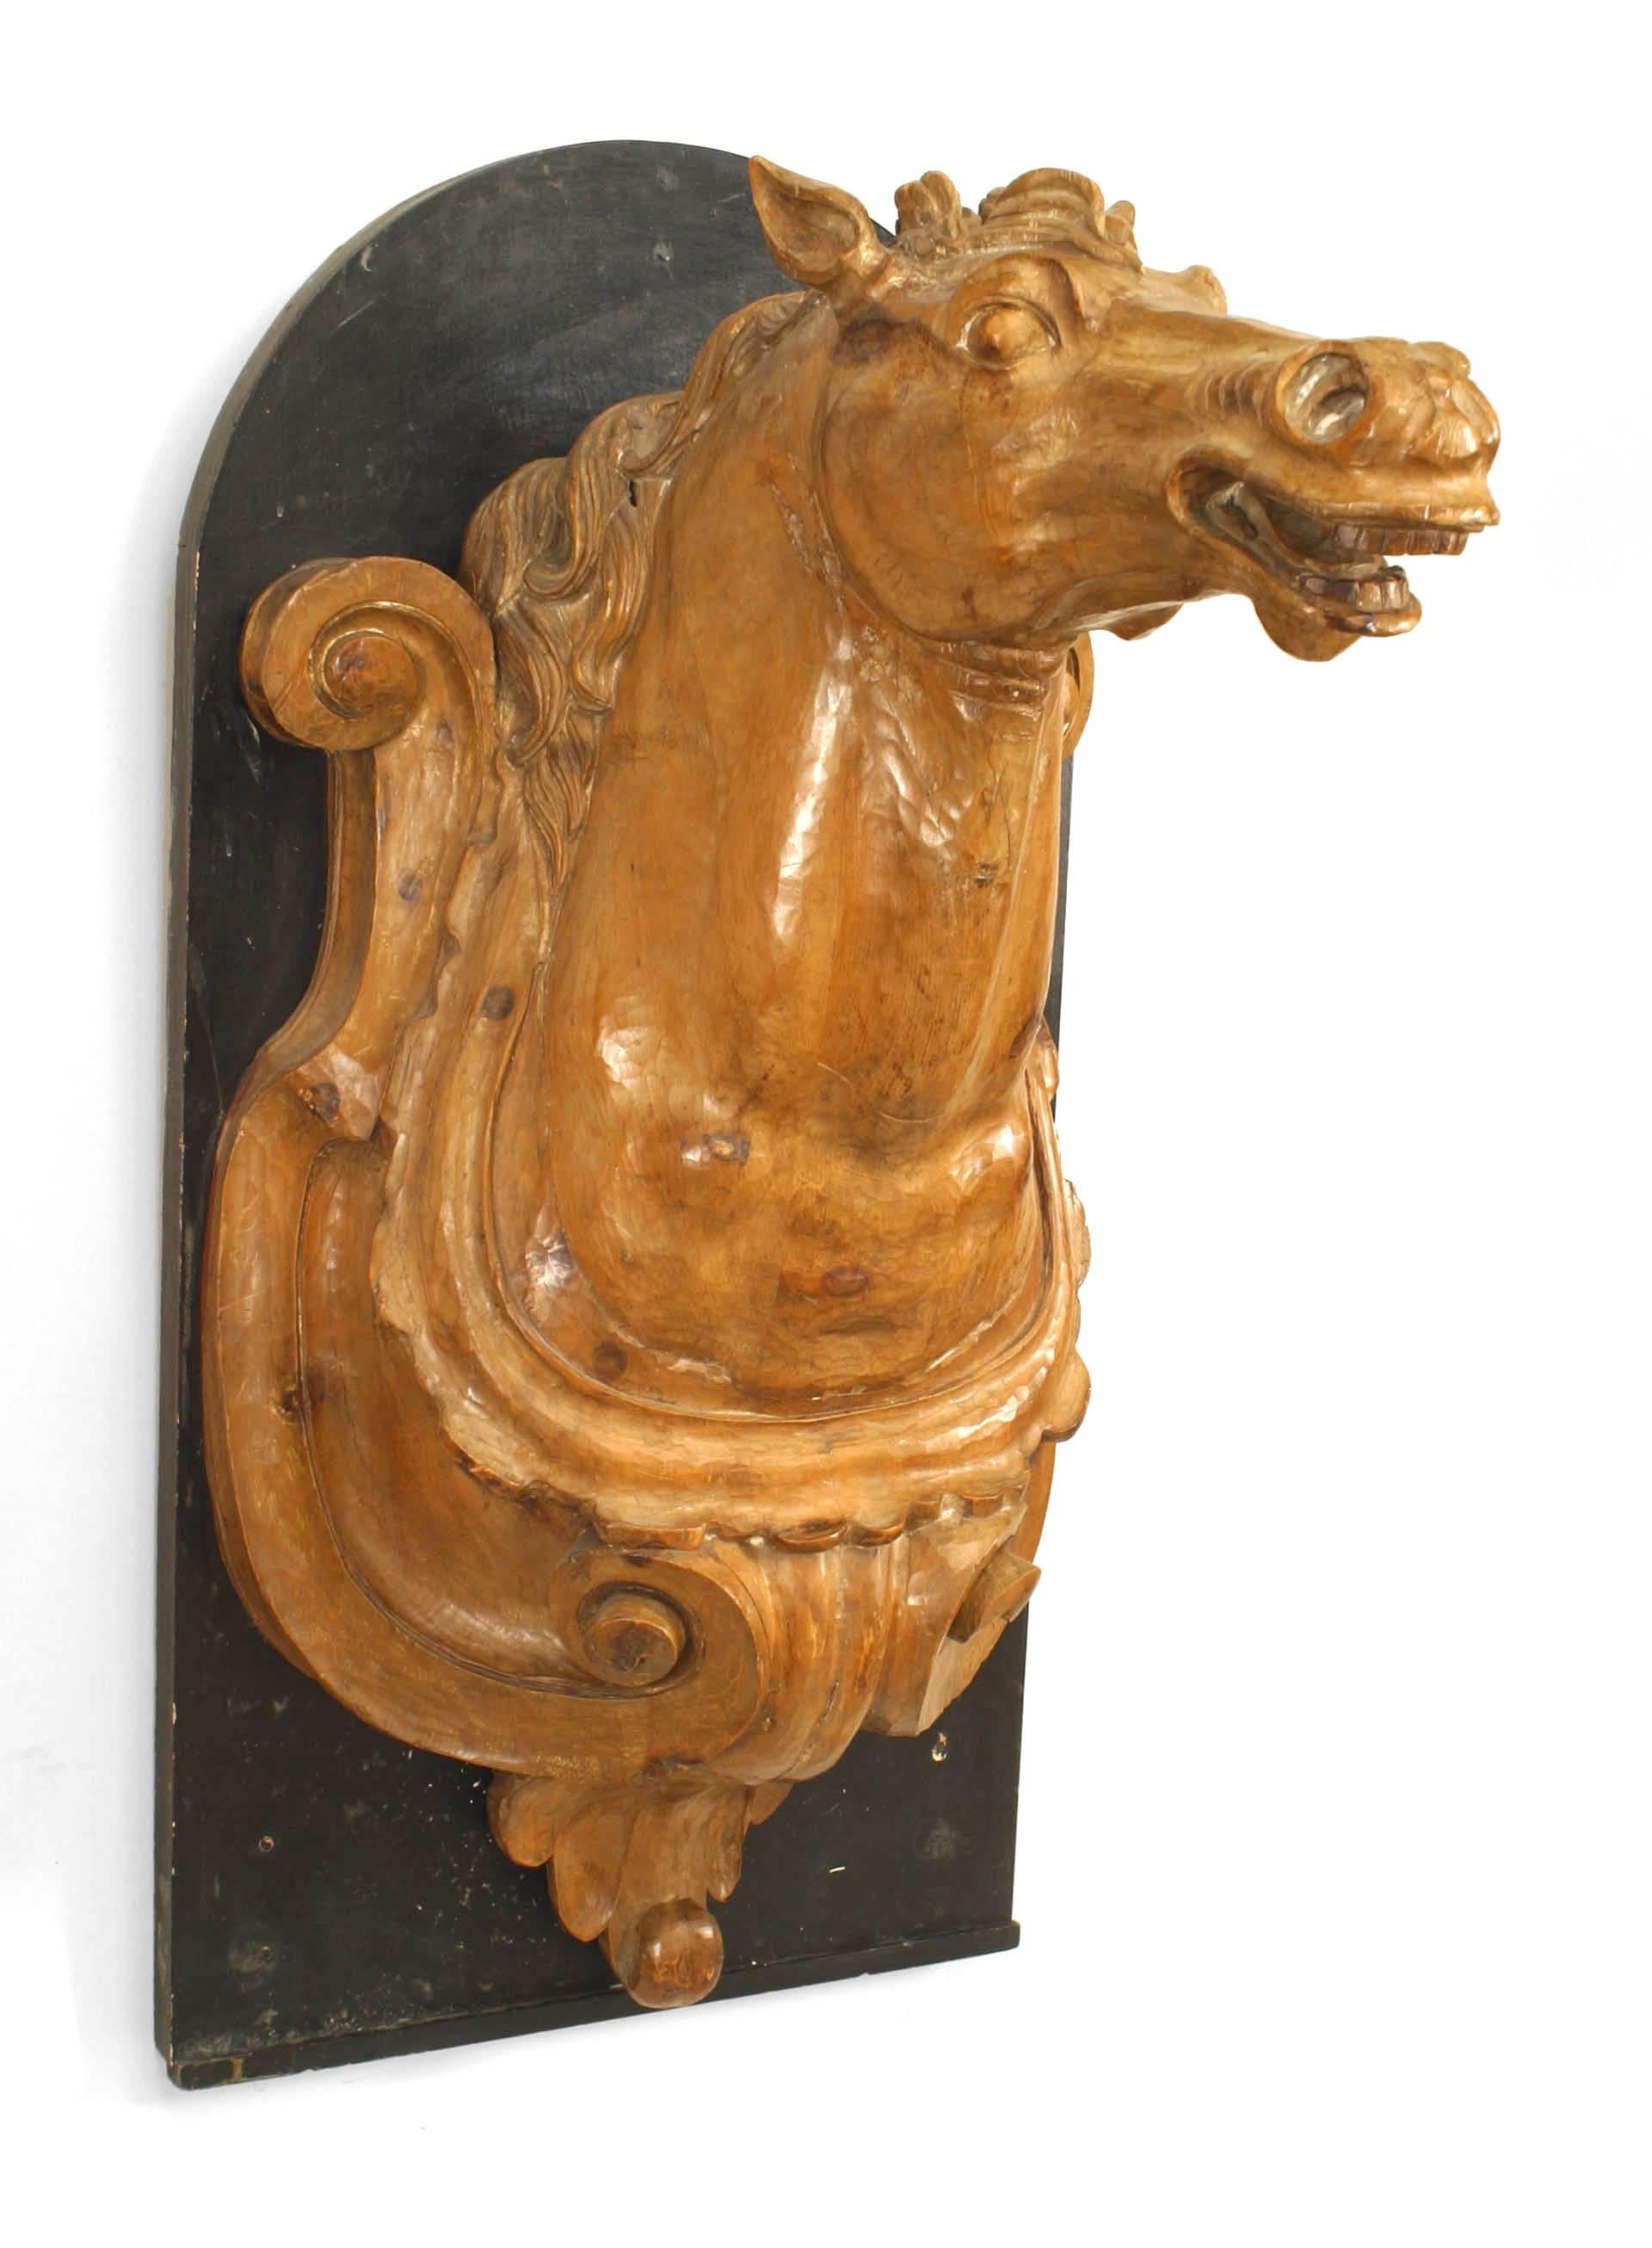 4 French Provincial (19th Century) carved pine life-size horse head wall plaques on black painted panel.(PRICED EACH)
